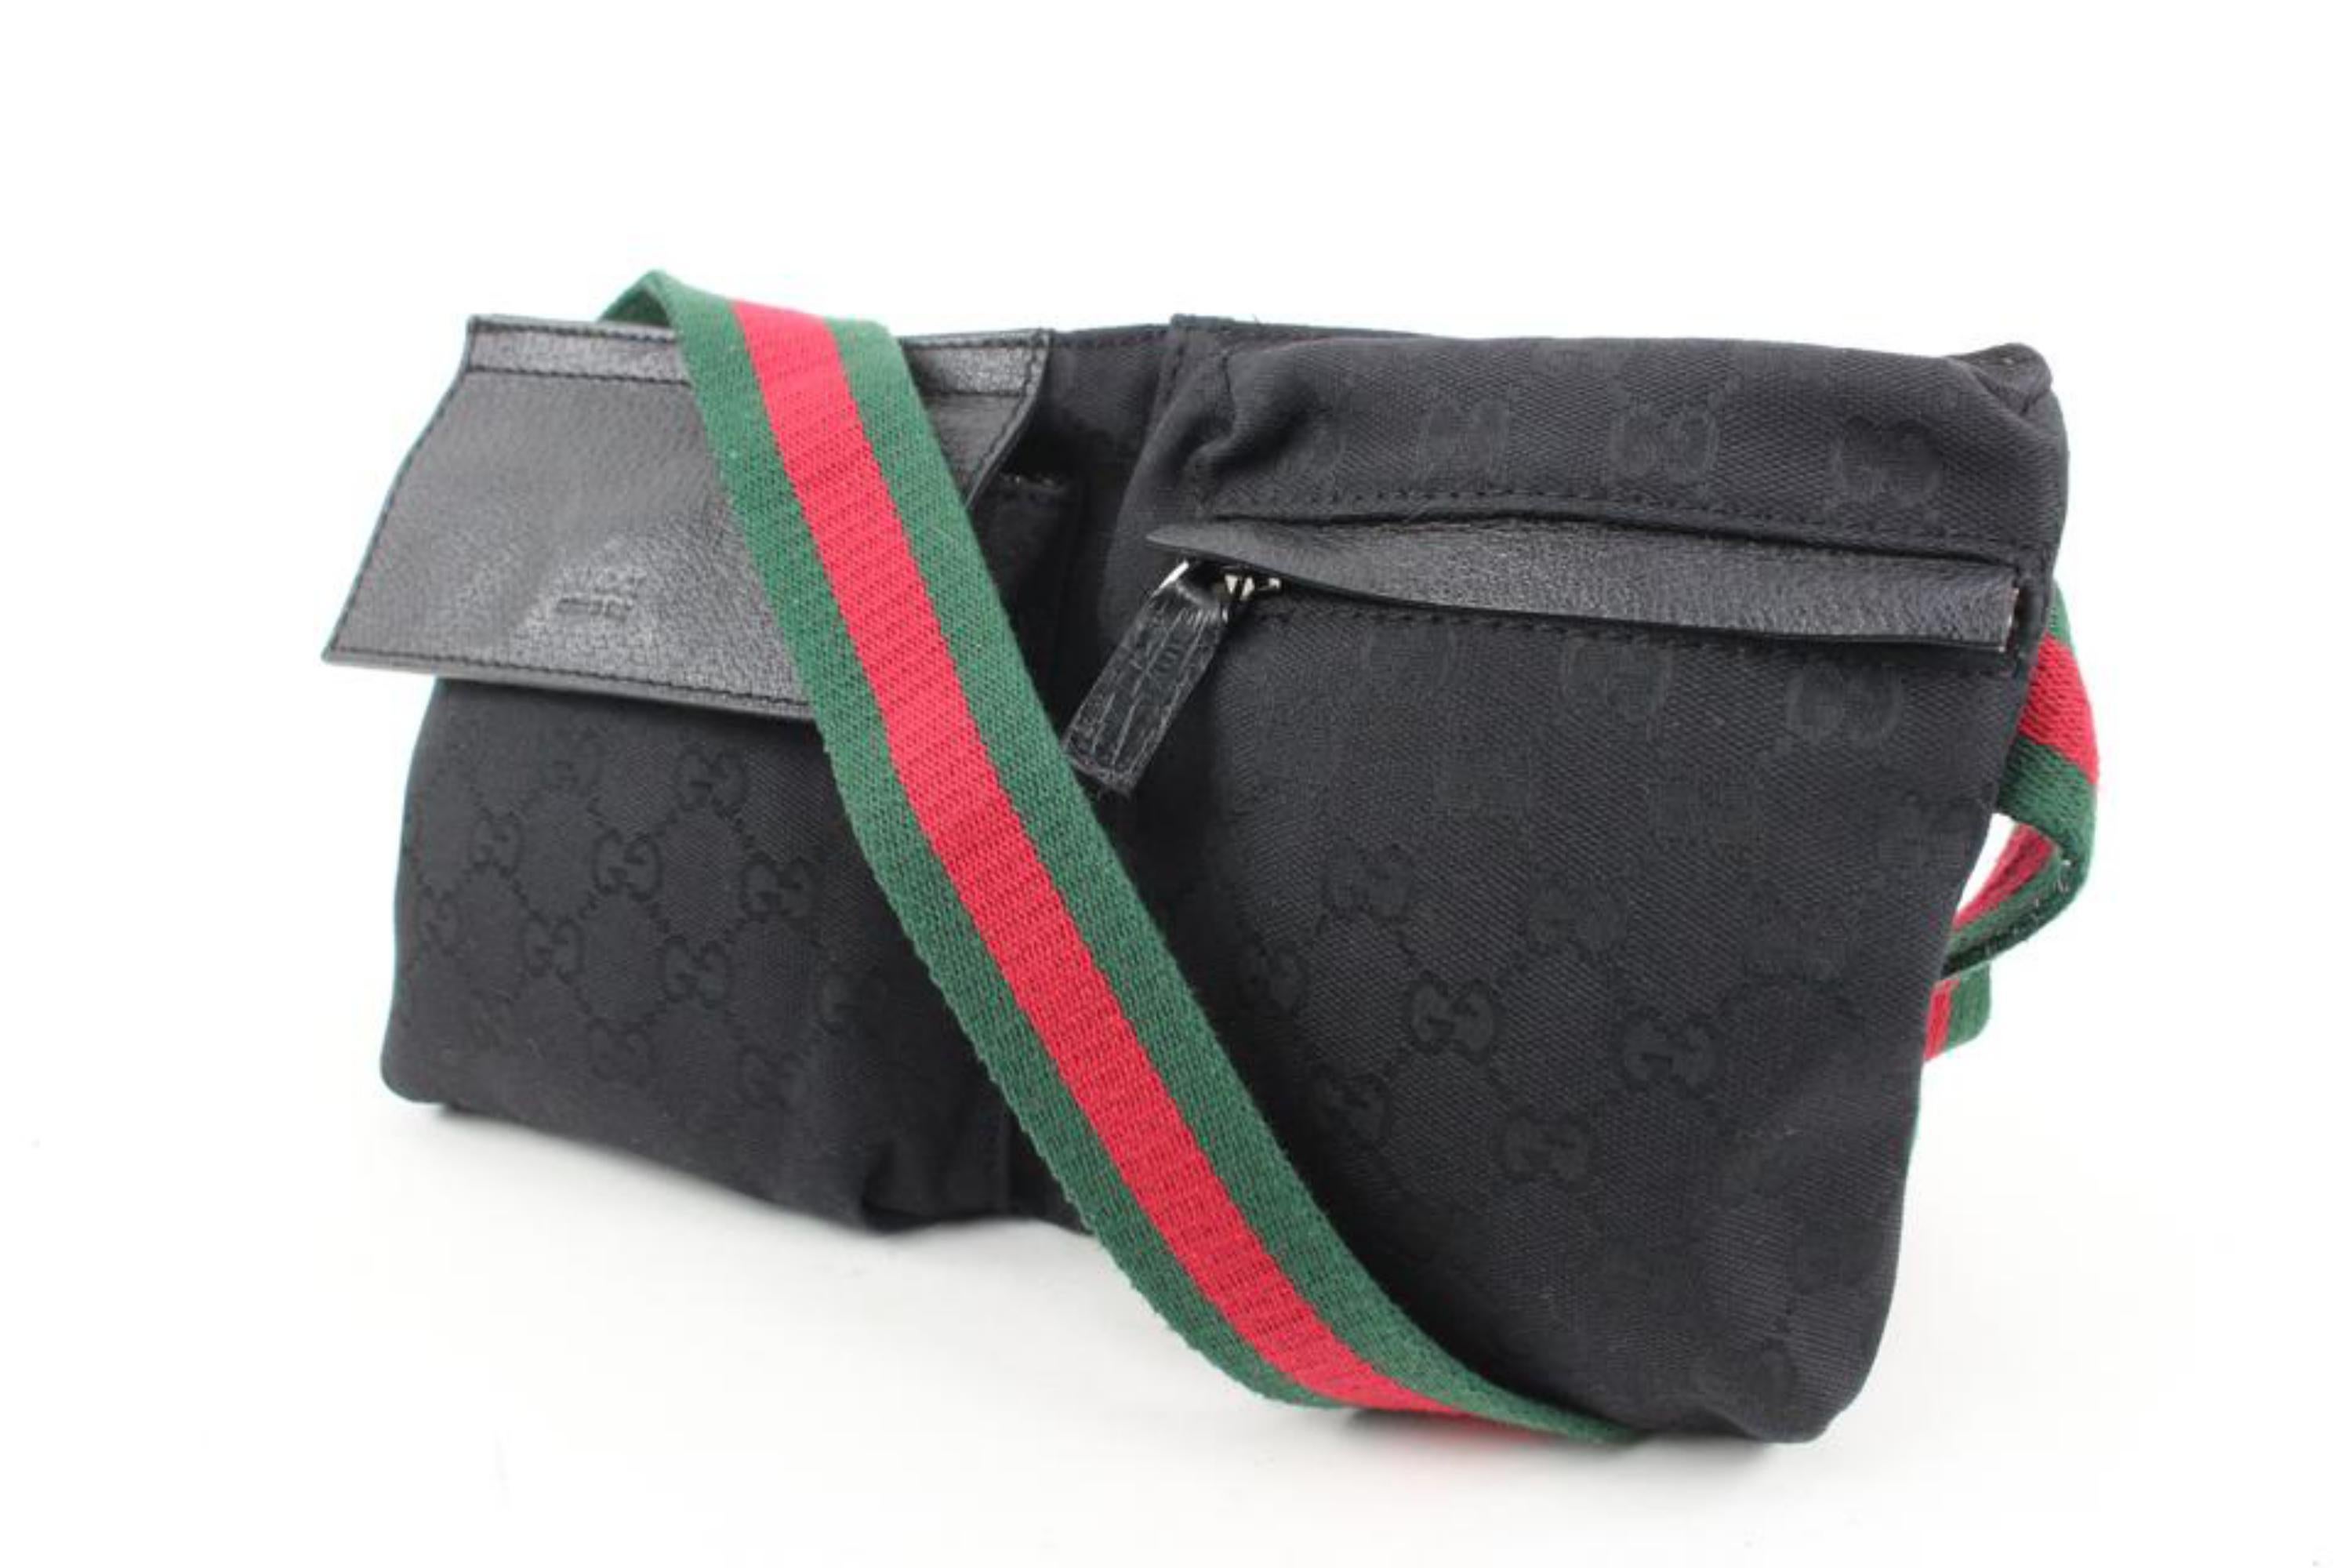 Gucci Rare Discontinued Black Monogram GG Web Belt Bag Fanny Pack 22g131s
Date Code/Serial Number: 28566 0168
Made In: Italy
Measurements: Length:  12